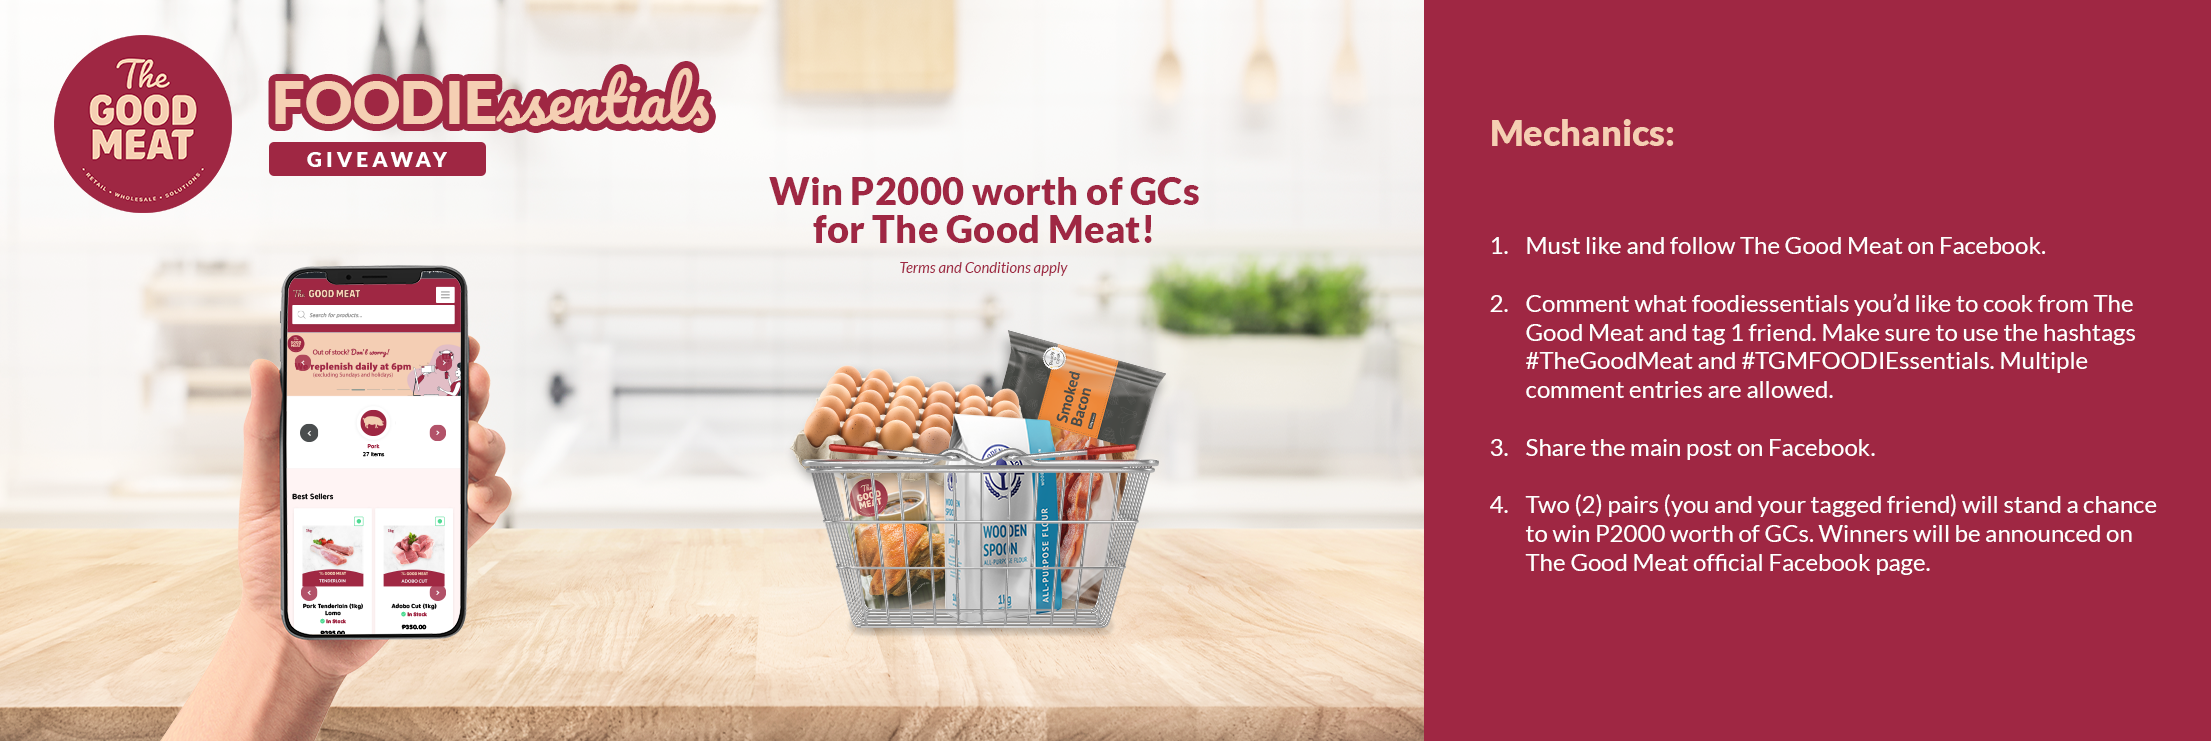 The Good Meat Foodiessentials Giveaway